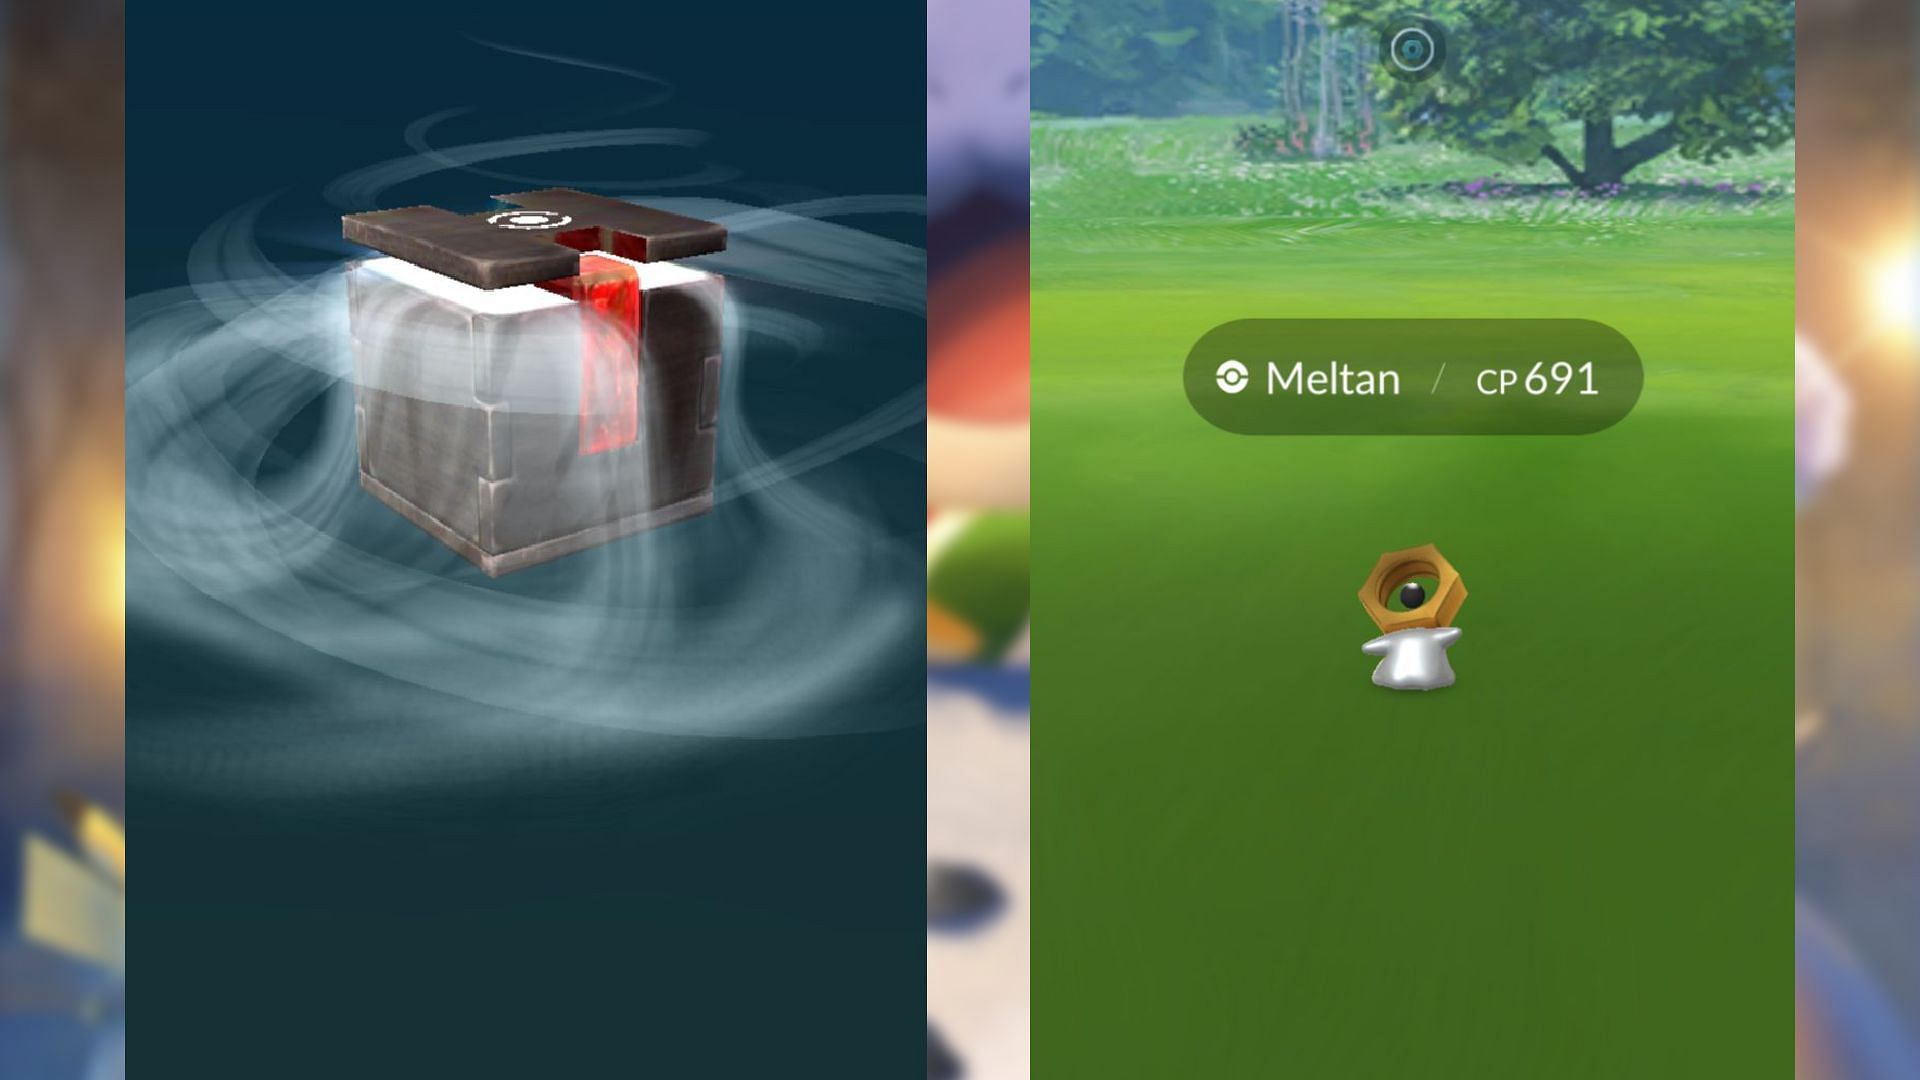 Let's GO! - Shiny Meltan available again! More Ditto in the wild! How to  get the Mystery Box? [Anti-Cheat Warning /Timezone Coords / GPX Routes /  Discord] : r/PoGoAndroidSpoofing